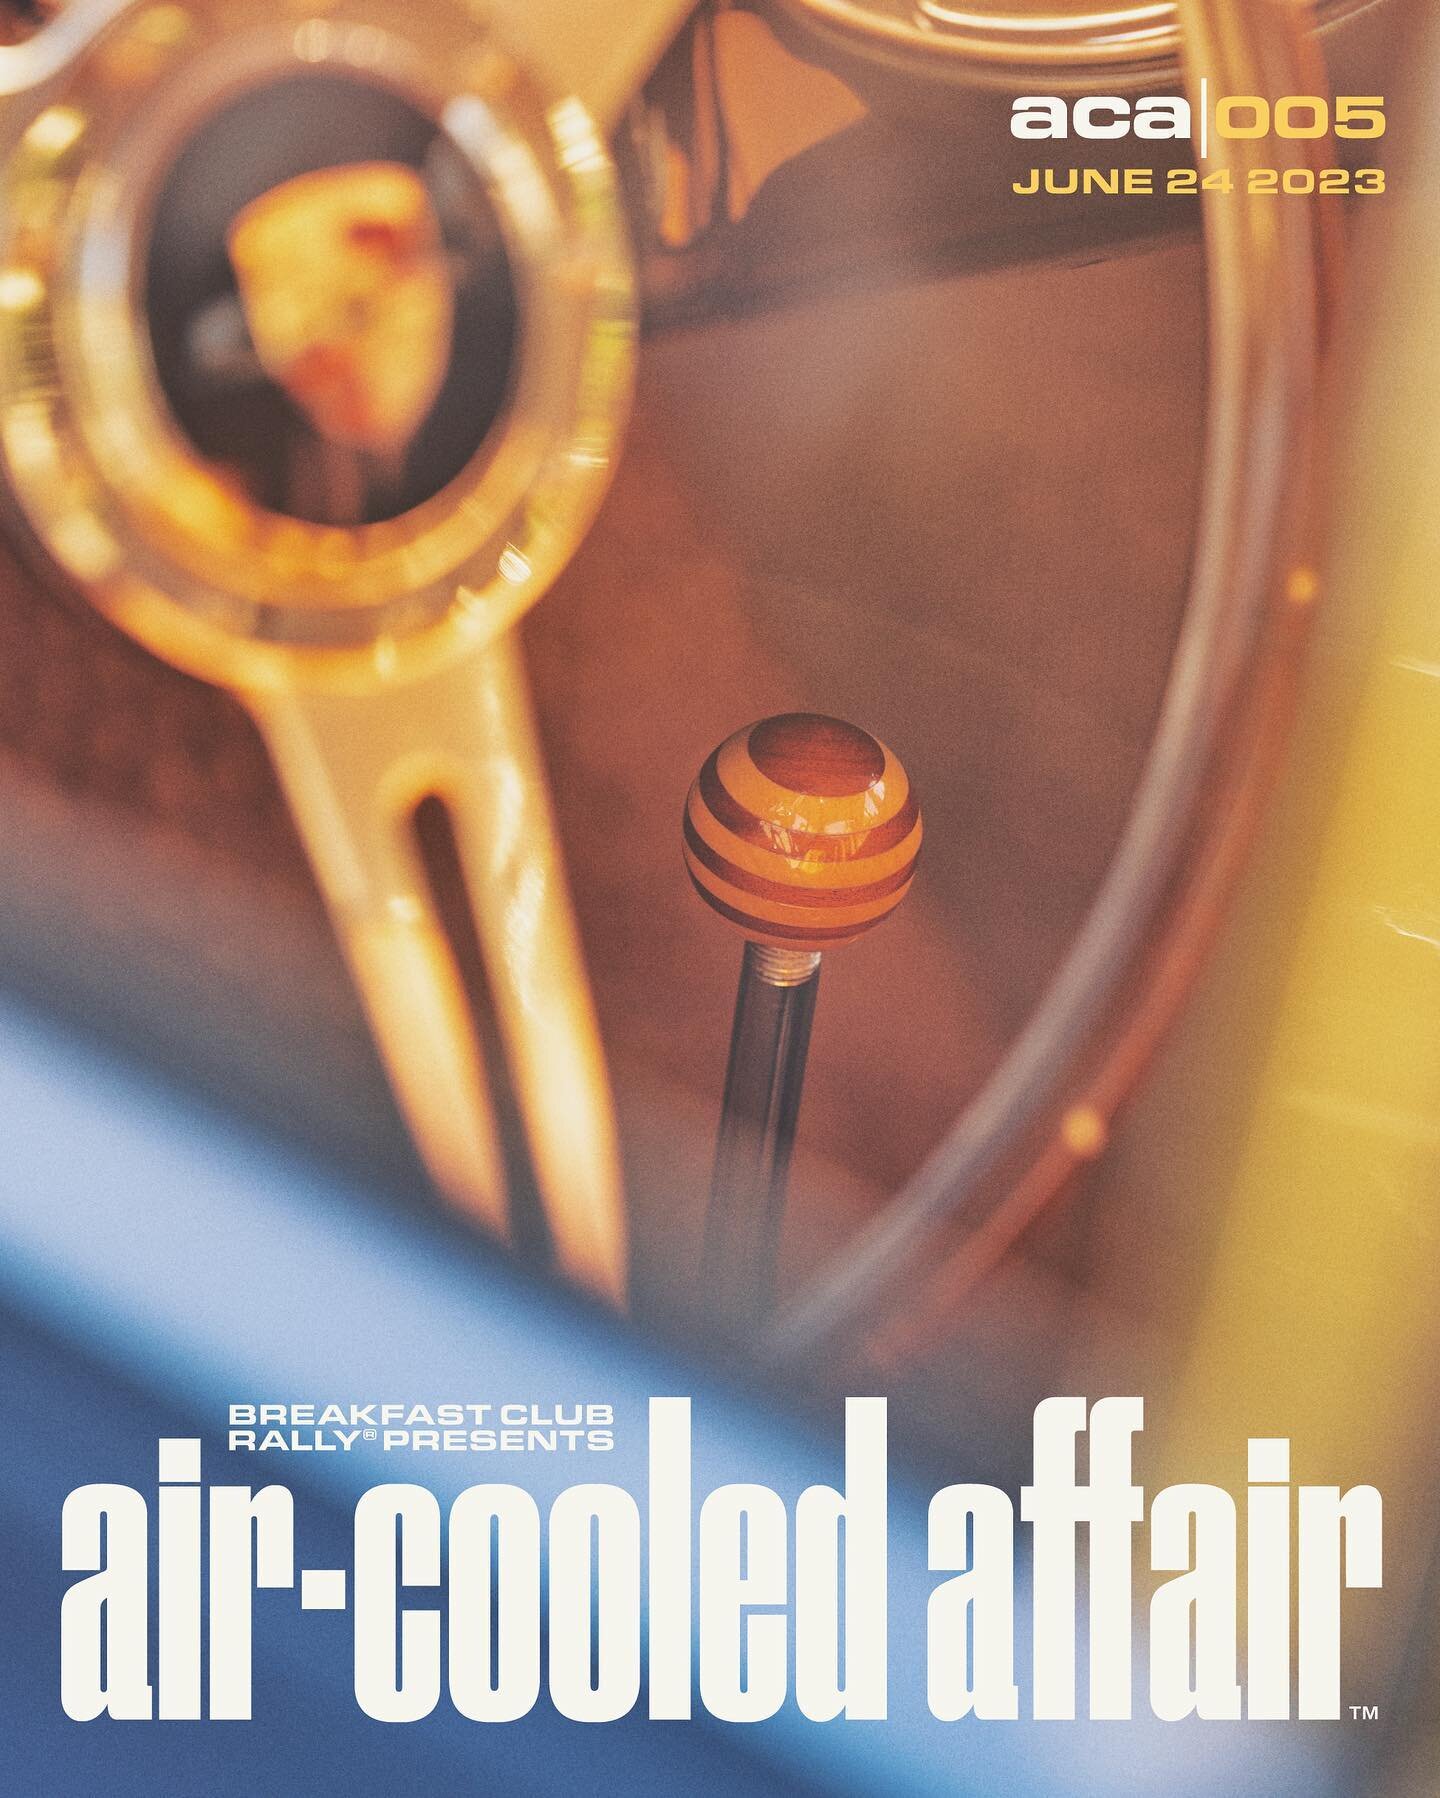 Air-Cooled Affair returns Saturday, June 24th, 2023 for round 005.

ACA | 005 is a special limited-capacity event focused exclusively on vehicles powered by air-cooled engines from Porsche and other manufacturers (VW, Corvair, Tatra, Trabant, NSU, BM